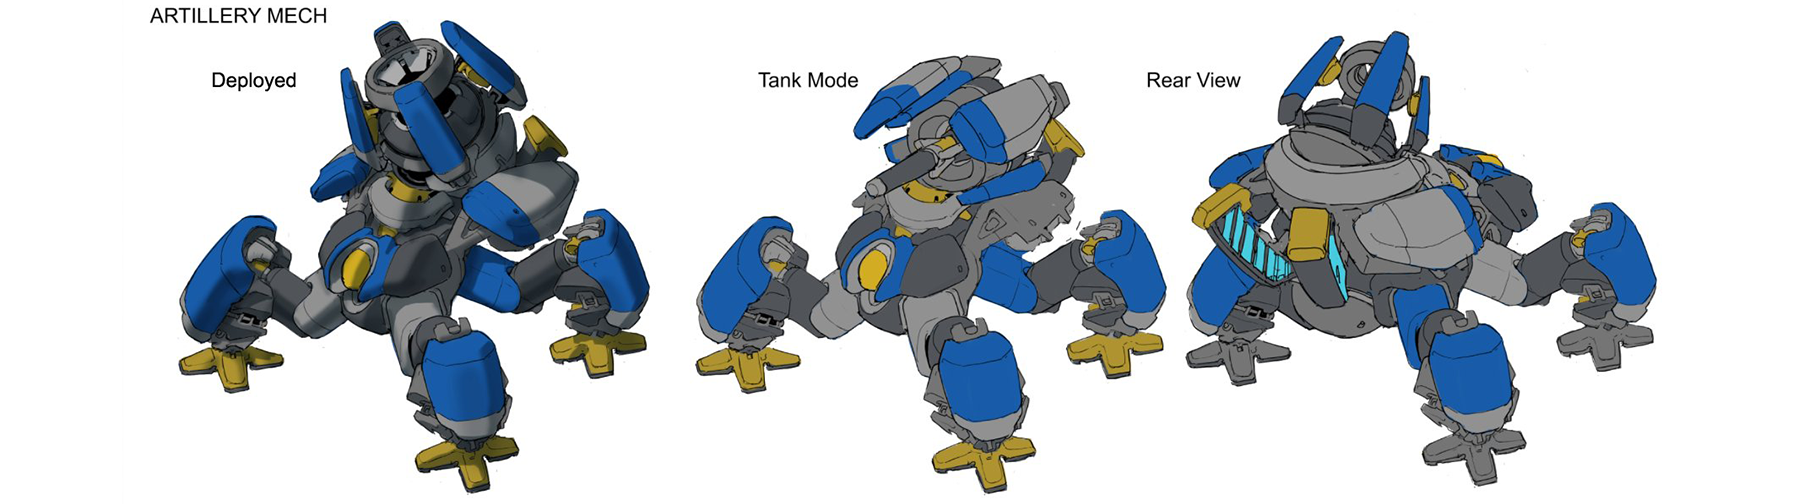 An artillery mech with 4 legs and a cannon on top, showcasing its Deployed Mode with a gun aiming up, Tank Mode aiming horizontally, and Rear View.